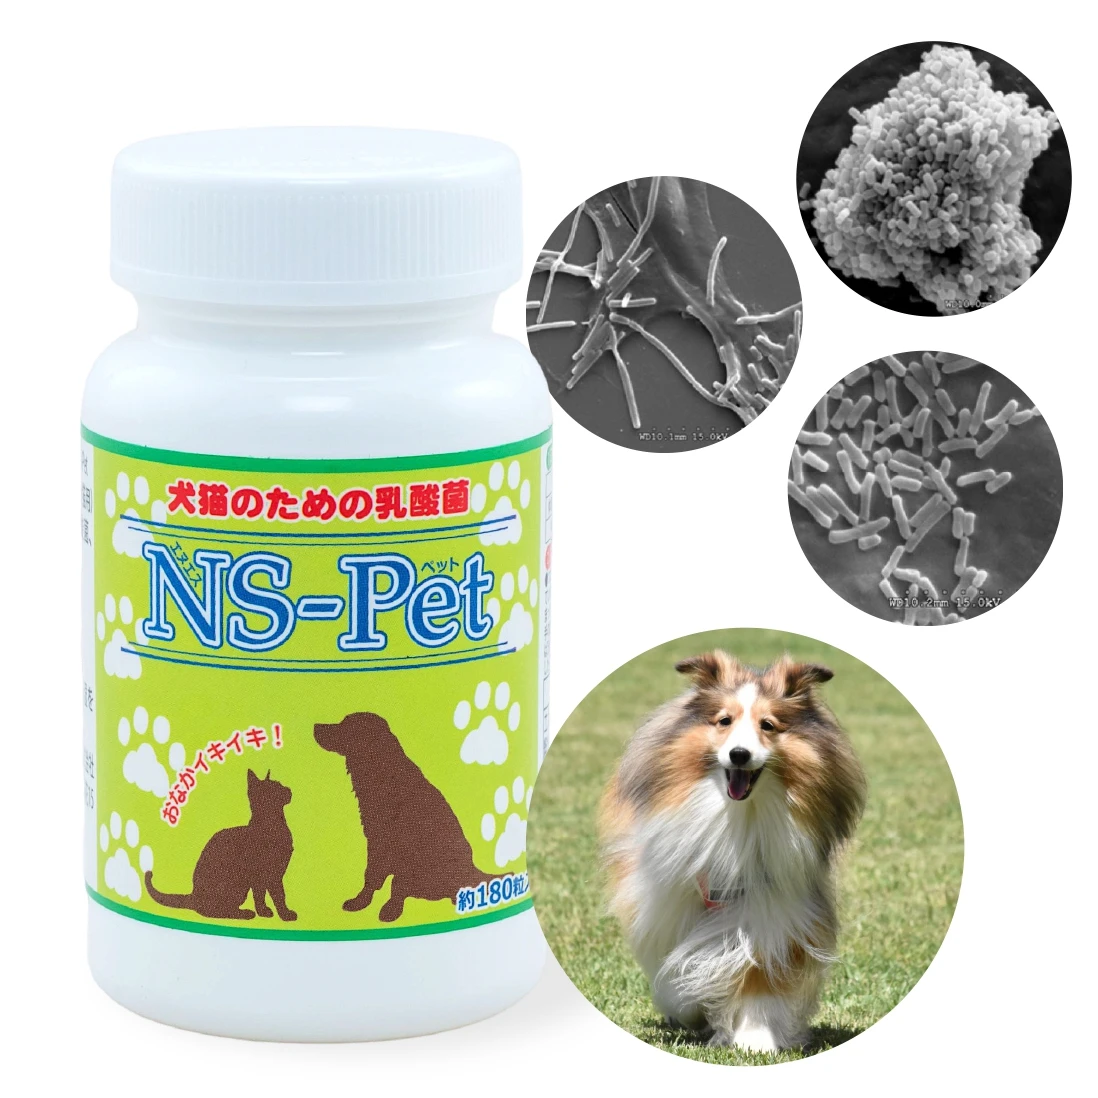 Yeast No Smoothing Agents Preservatives Superior Quality Pet Food Dog  Supplement - Buy Dog Supplement,Dog Supplement,Dog Supplement Product on  Alibaba.com